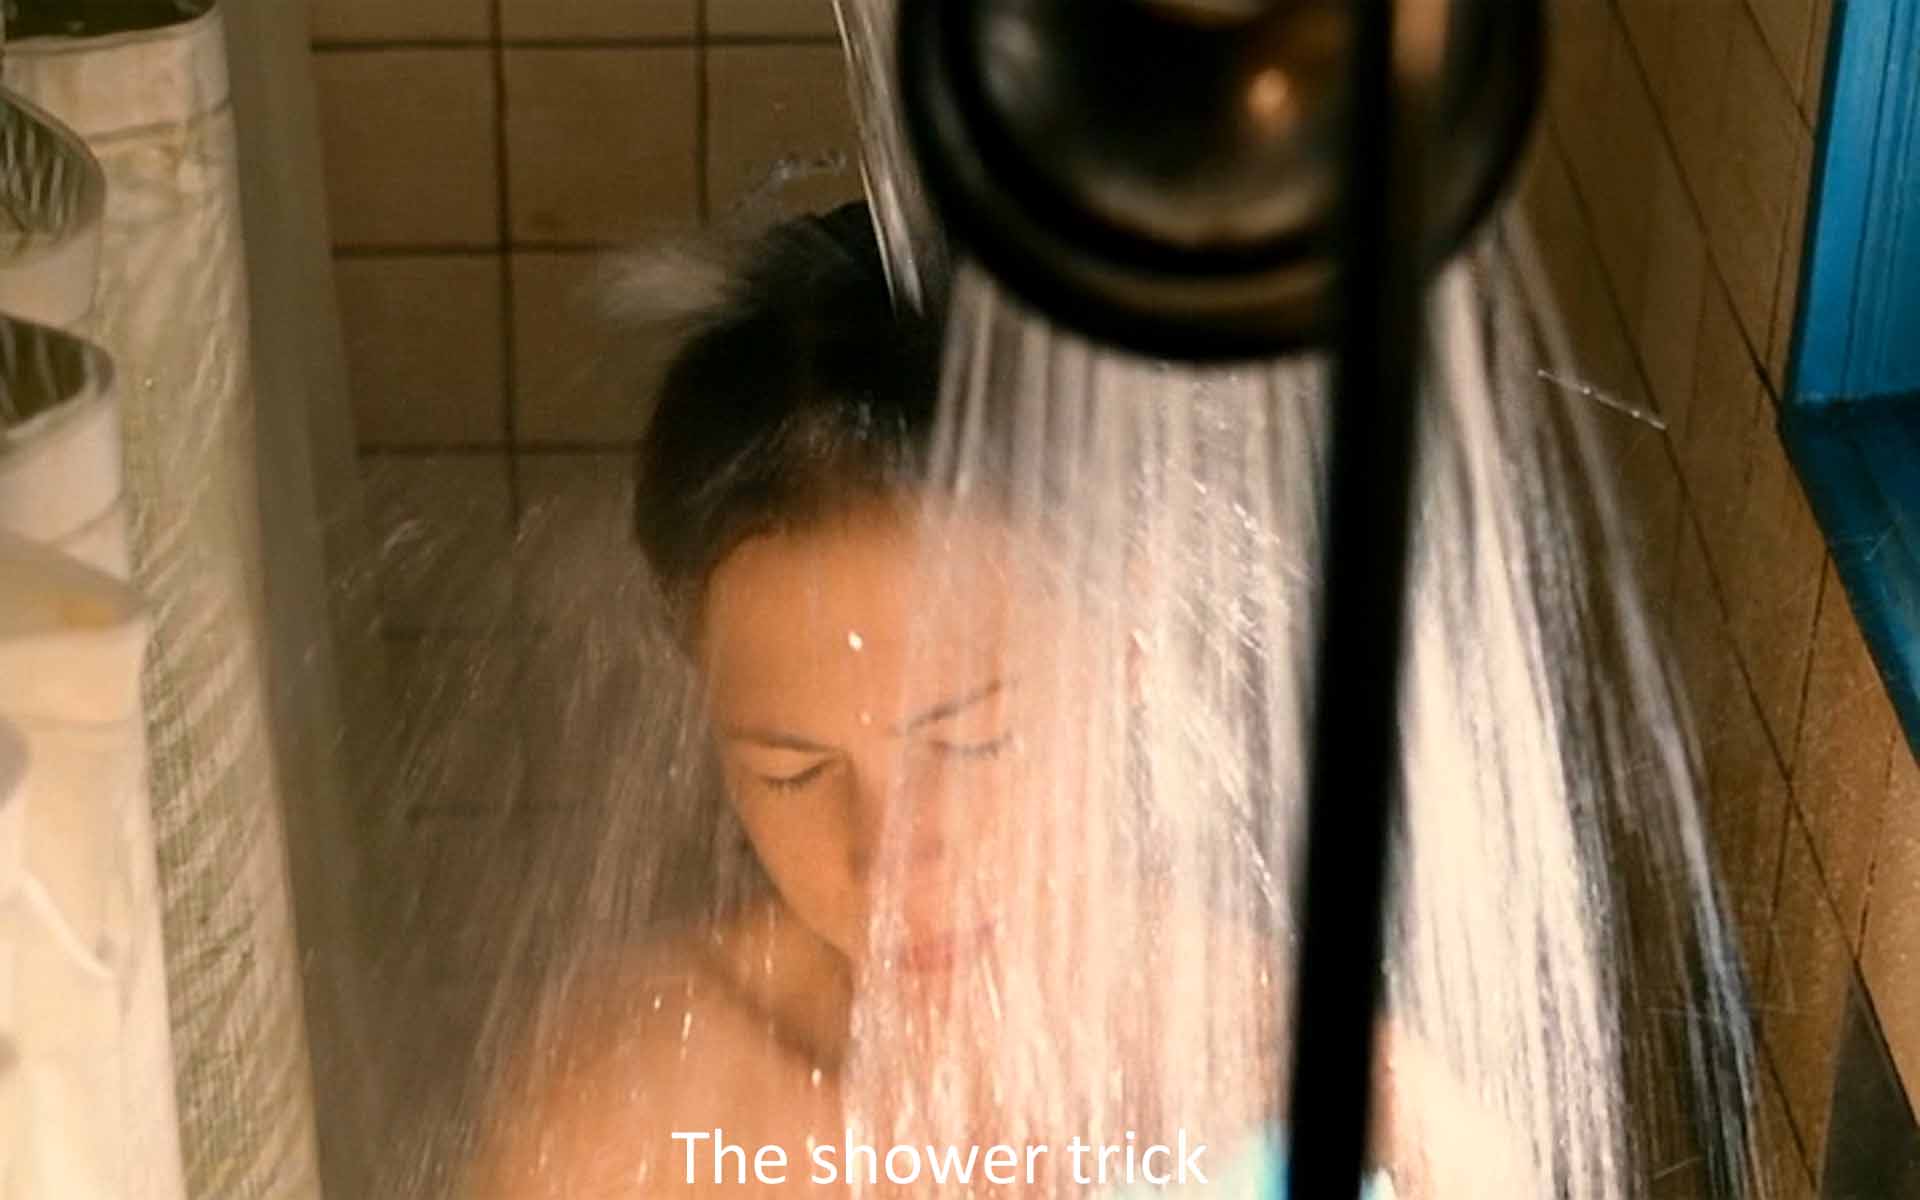 The shower trick